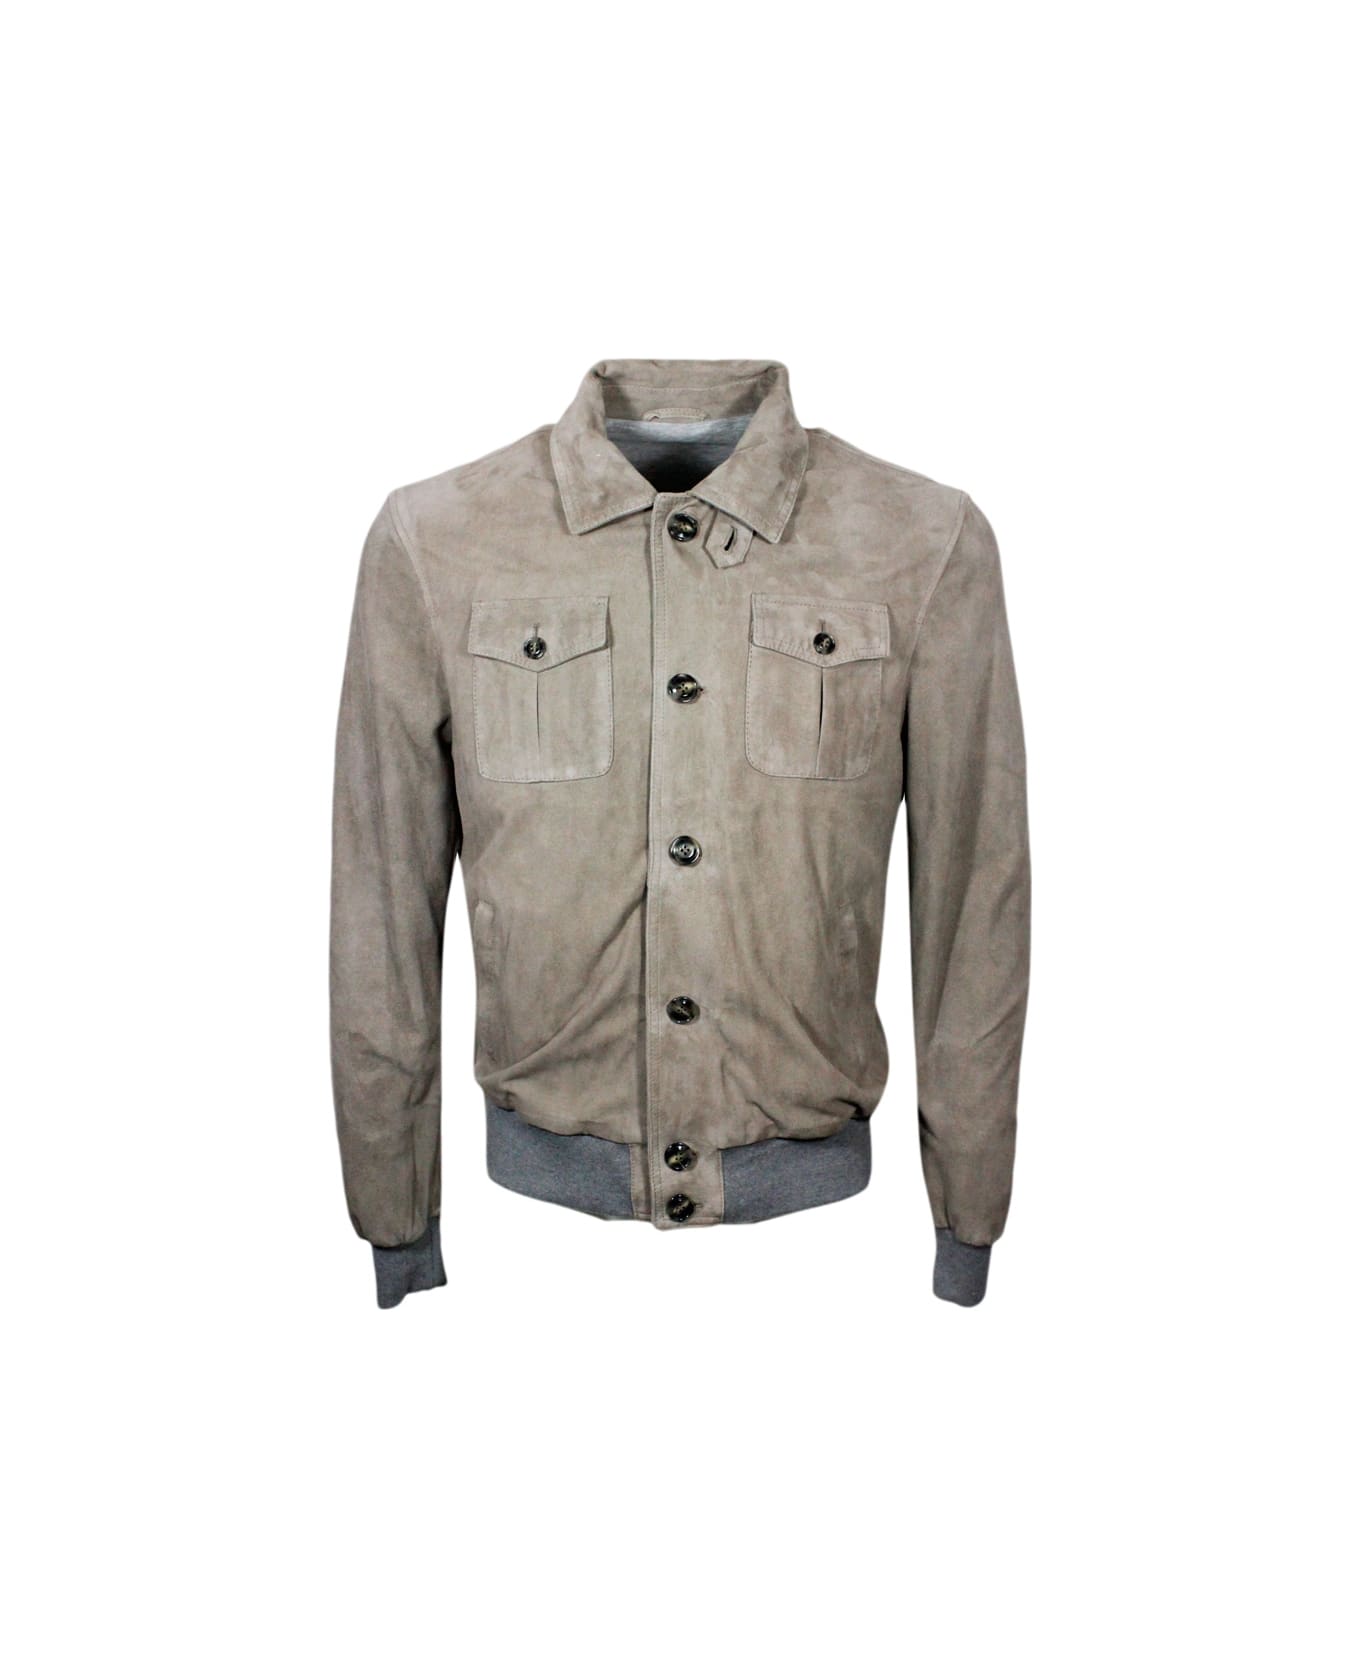 Barba Napoli Bomber Jacket In Soft Stretch Suede With Button Closure And Cuffs And Knitted Bottom. Interior In Cotton Jersey - Beige